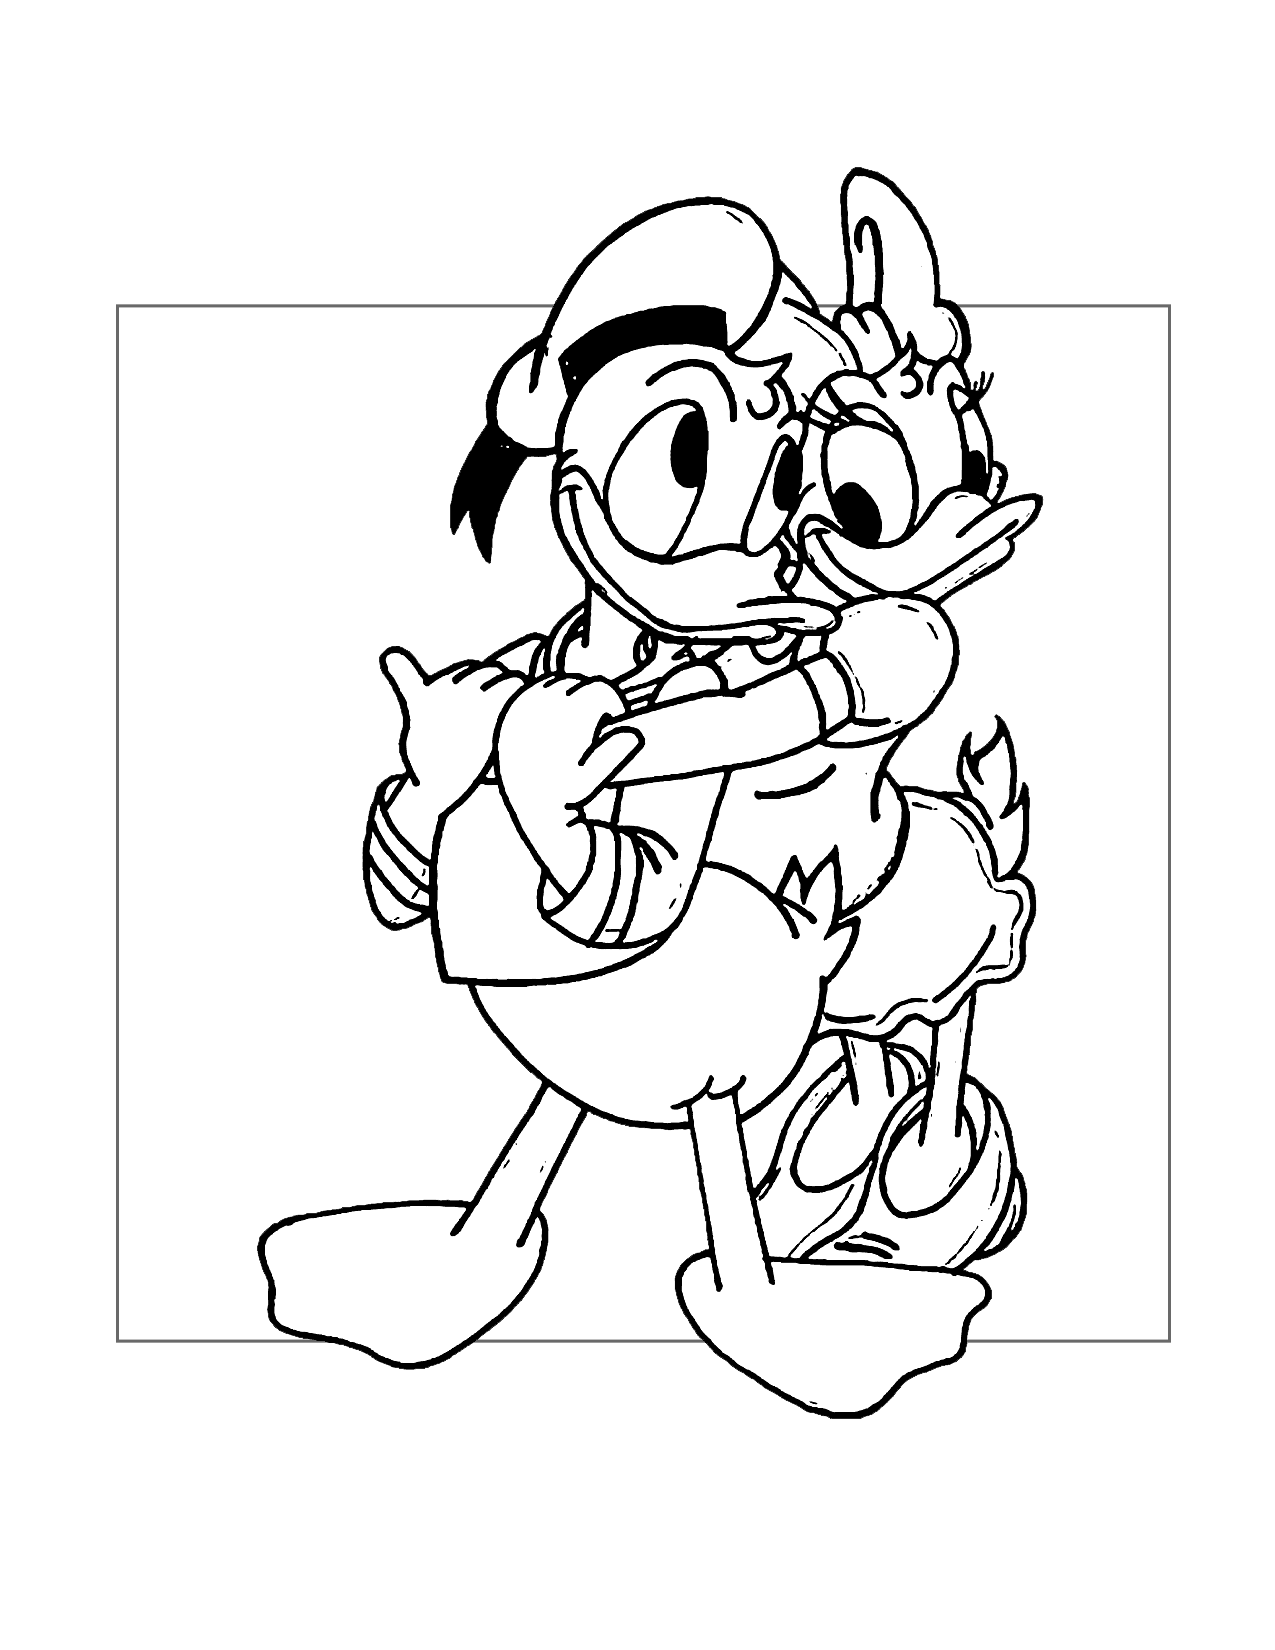 Donald And Daisy Duck Coloring Page